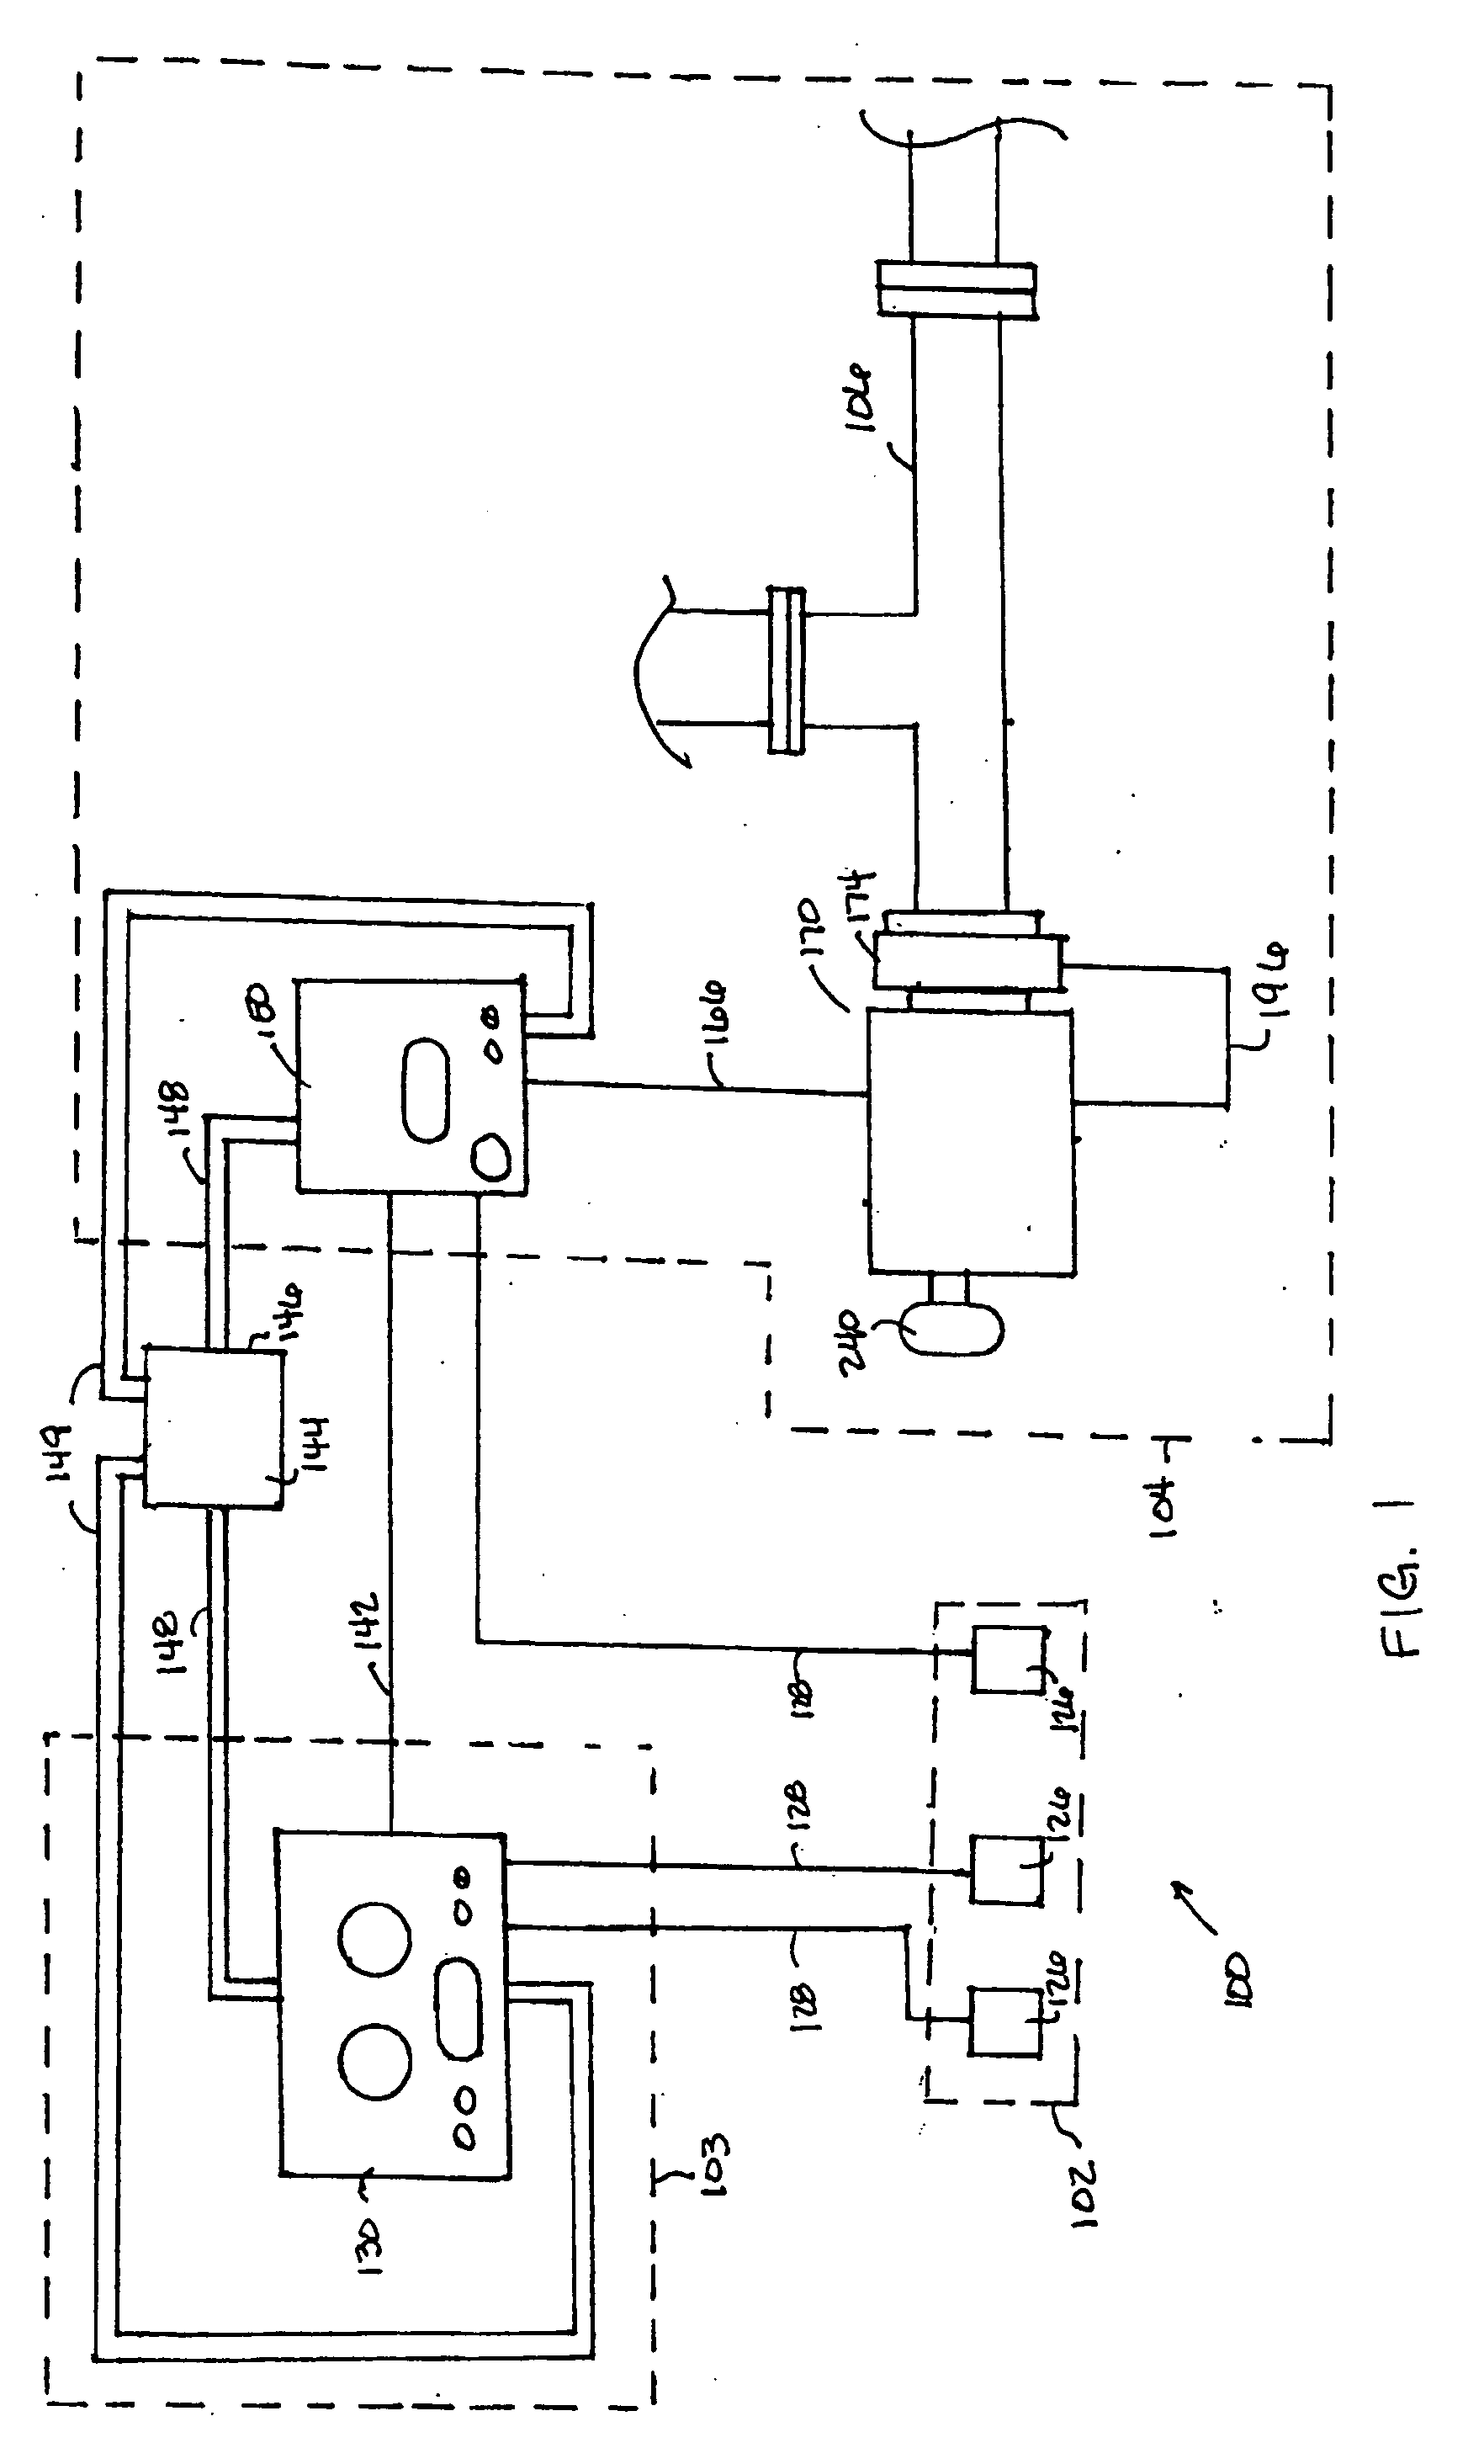 Apparatus for controlling a pressure control assembly in a hazardous area